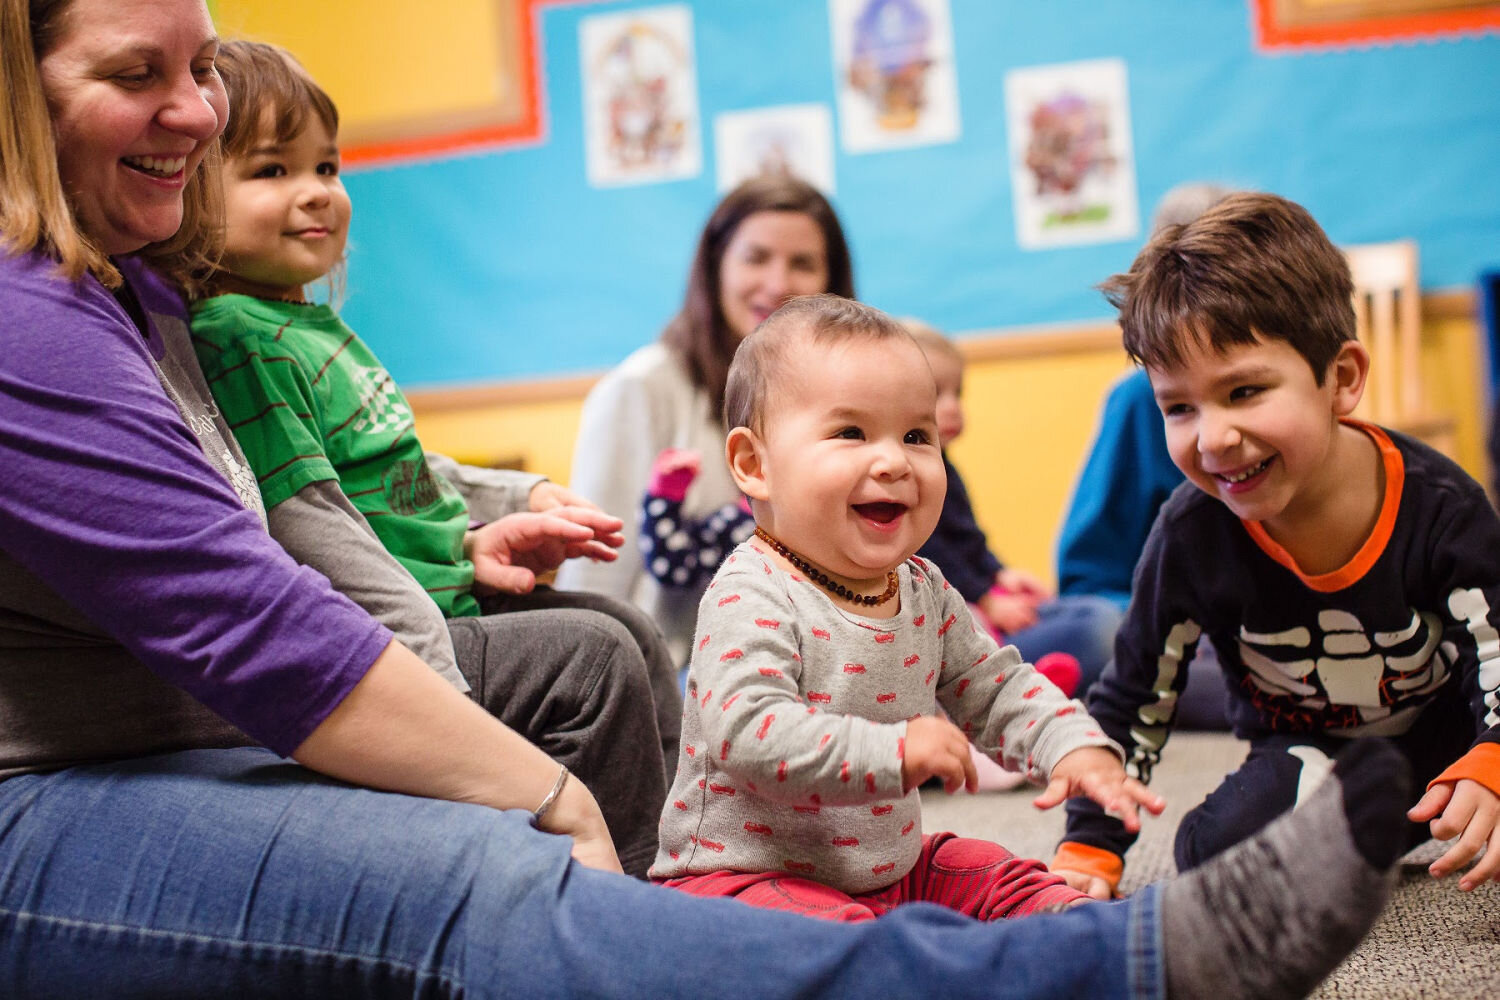   Enjoy giggles and laughter   Music classes for families with babies, toddlers and preschoolers  CALL  651-263-9475  TO SCHEDULE YOUR FIRST CLASS   REQUEST INFO  